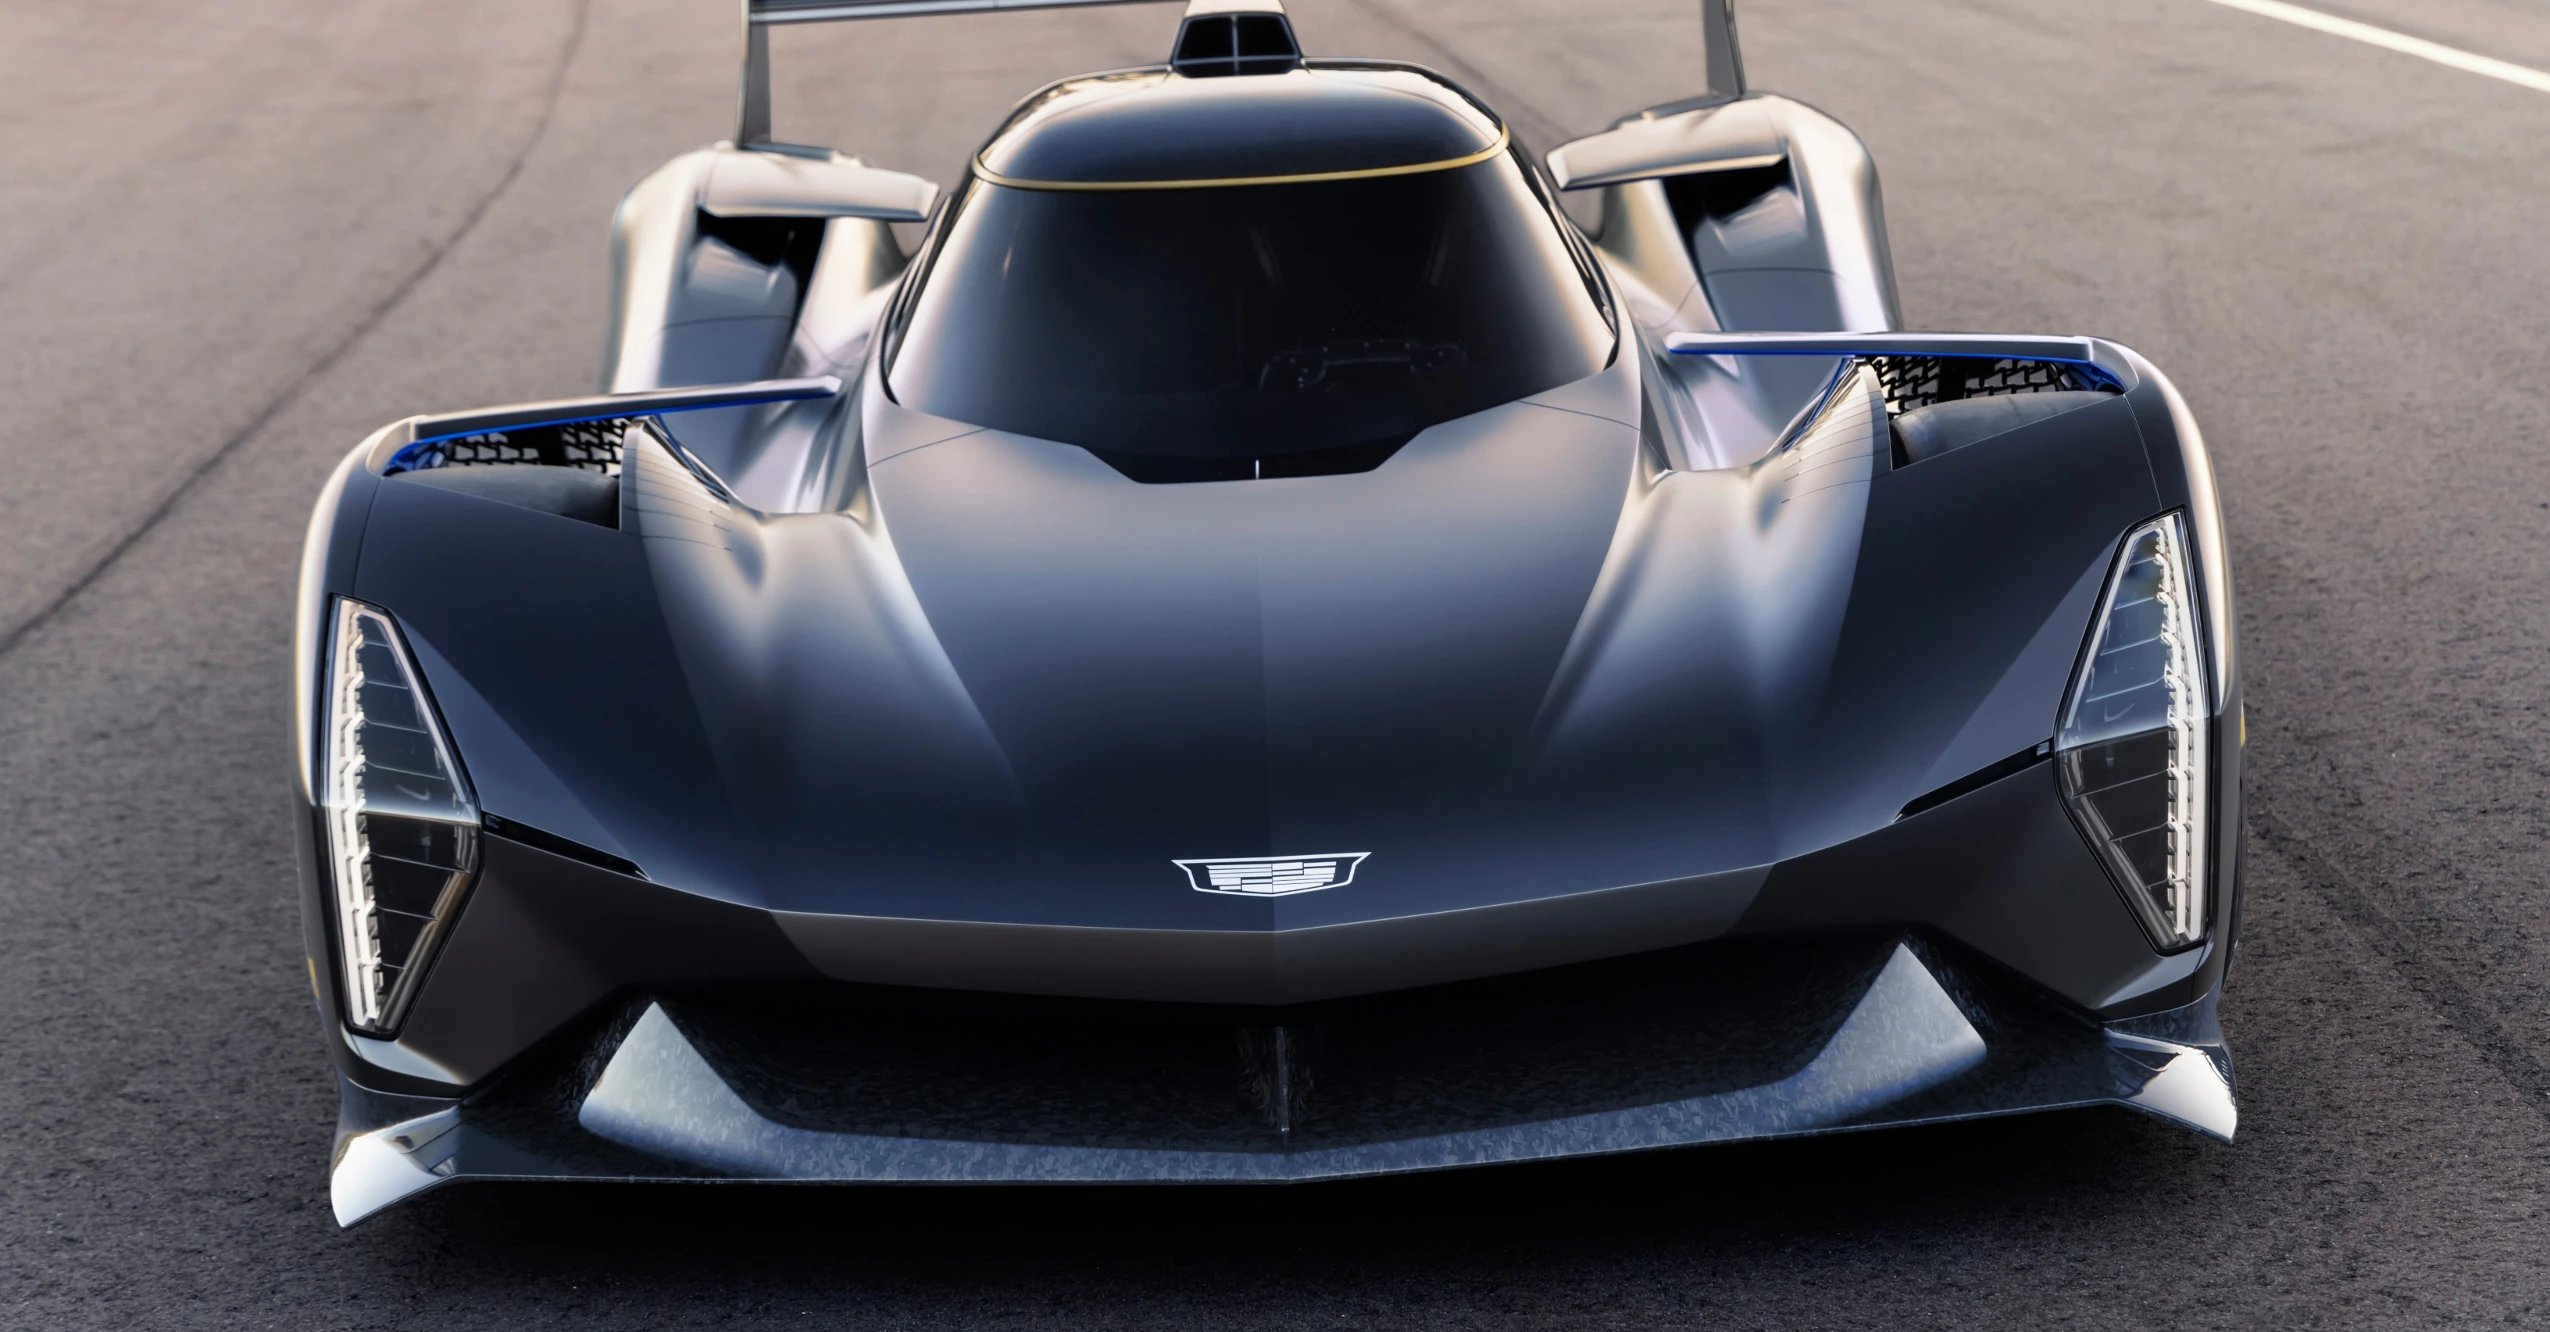 Meet The Project GTP Hypercar, Cadillac’s New Race Car Targeting A Le Mans Win